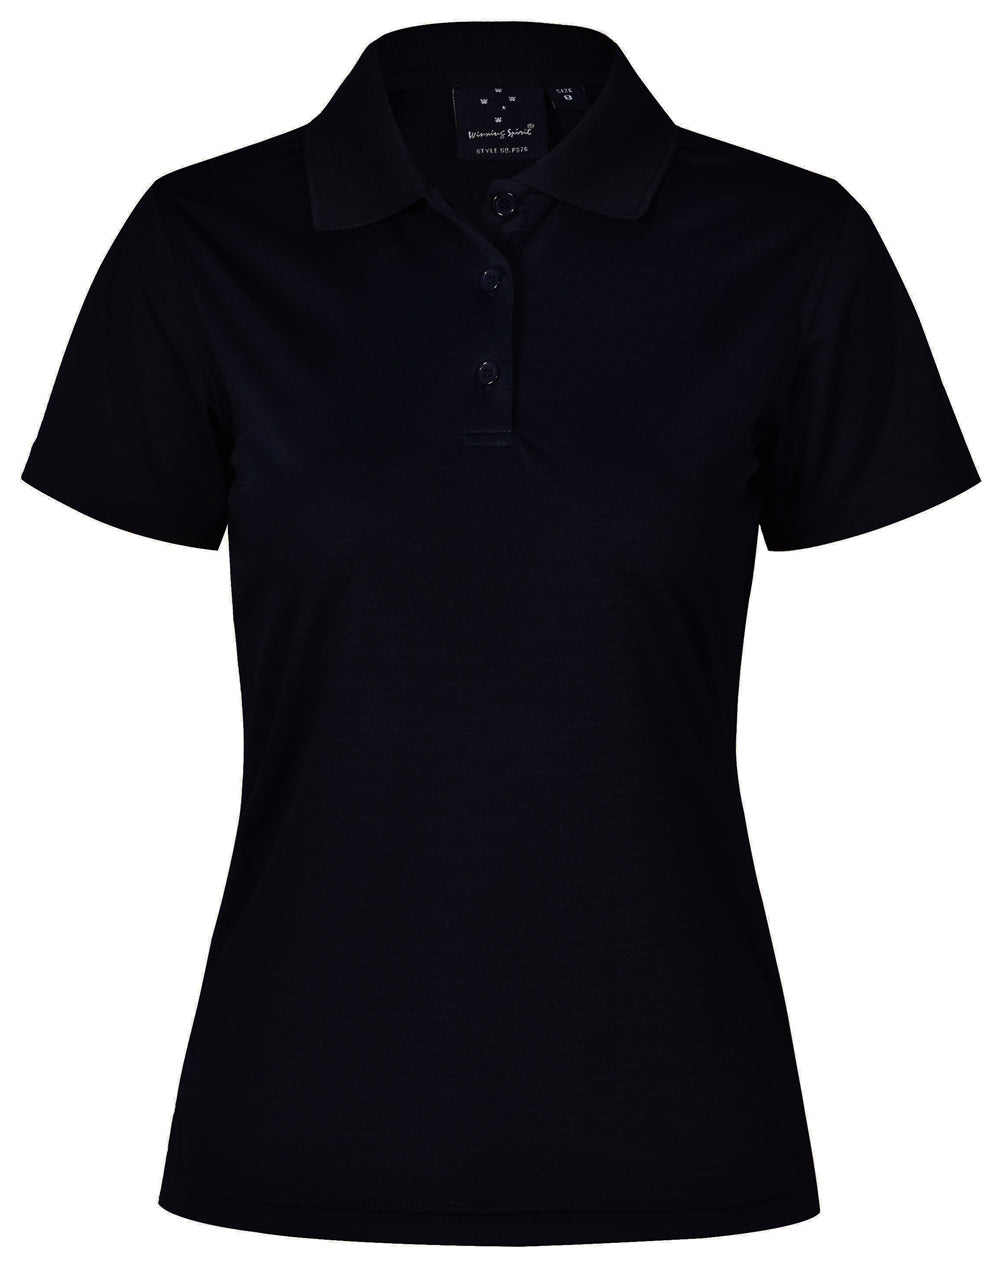 [PS76] Ladies' Cooldry Textured Polo